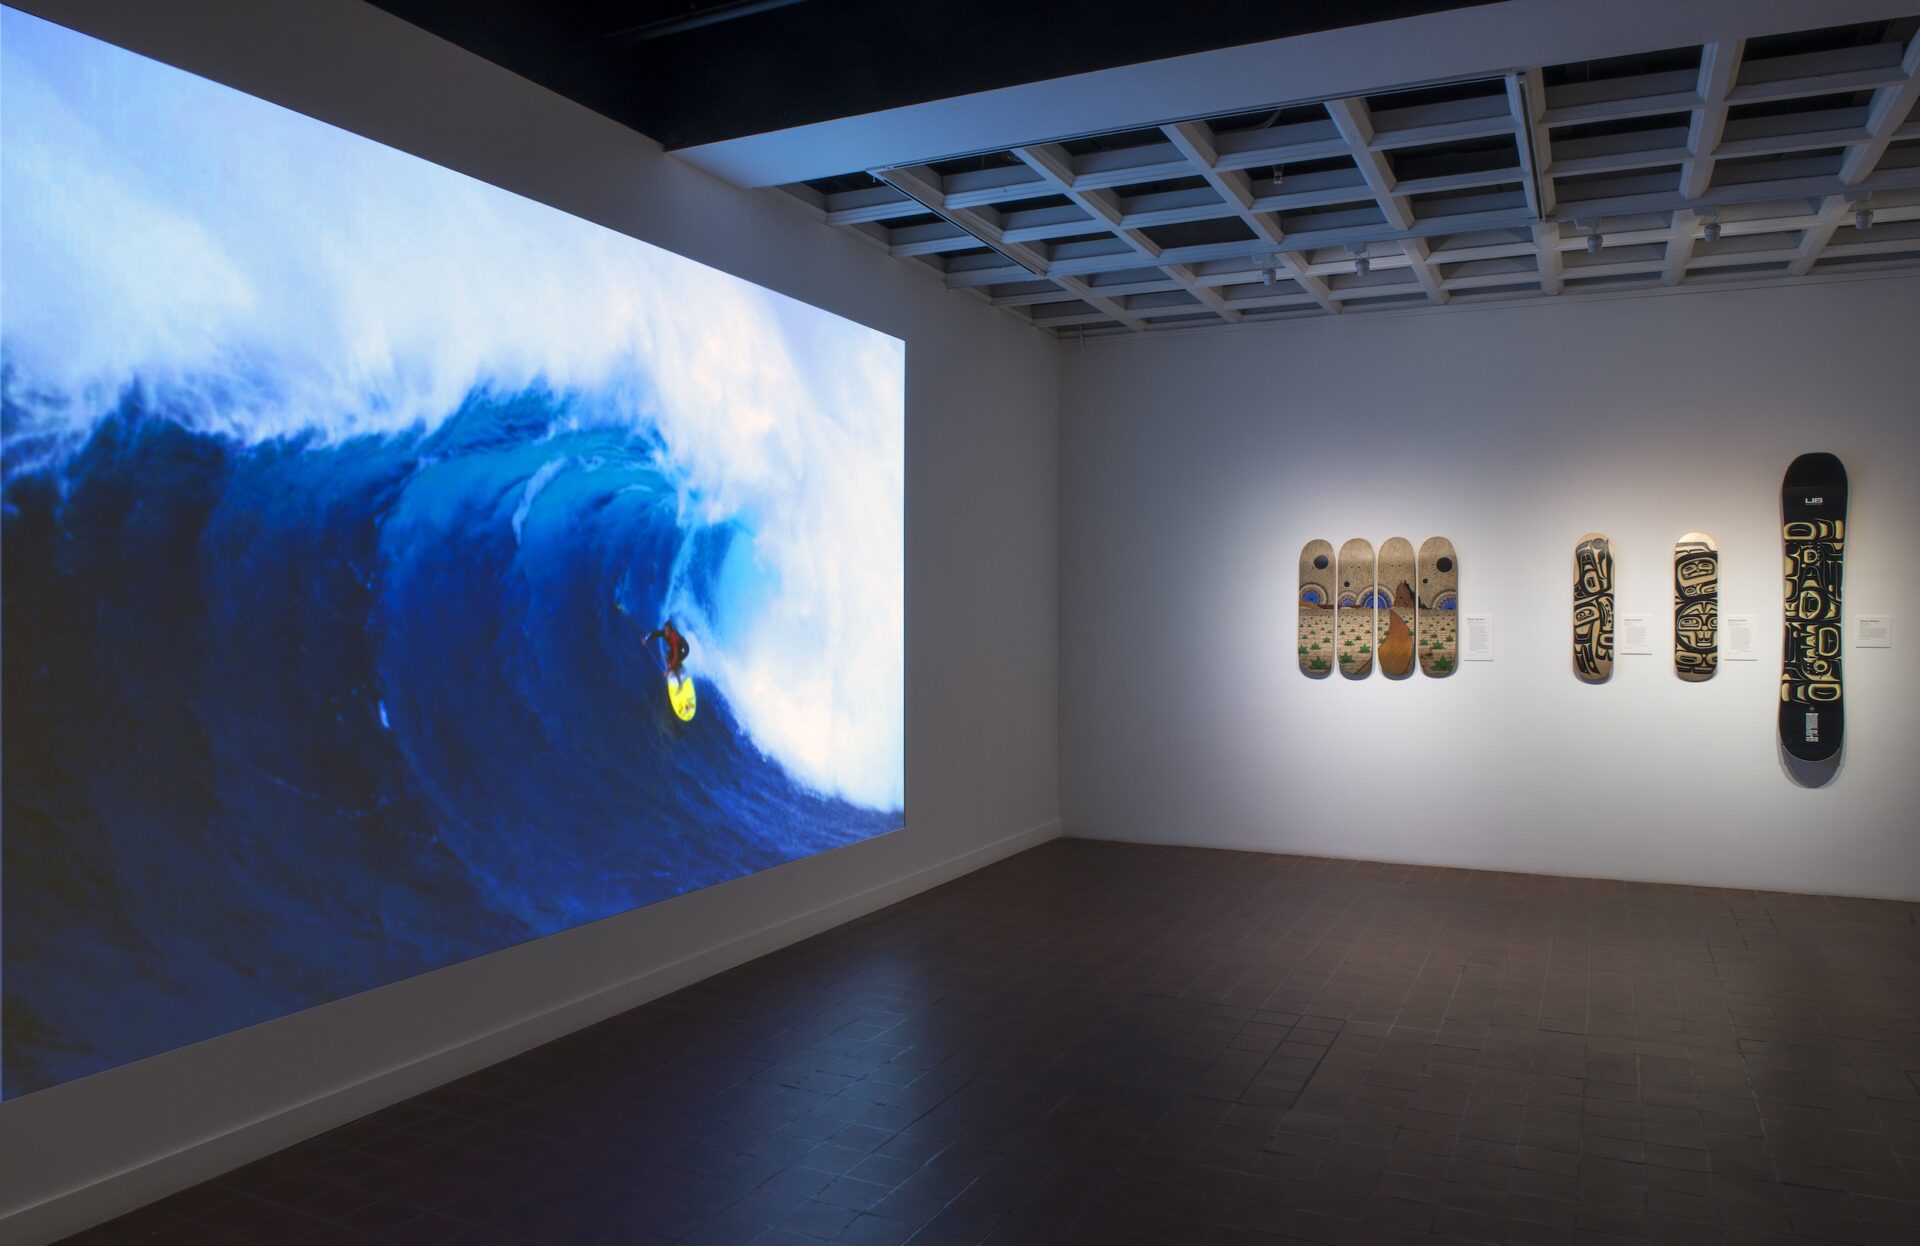 A room with several surfboards on the wall and a digital still of a surfer on a wave.